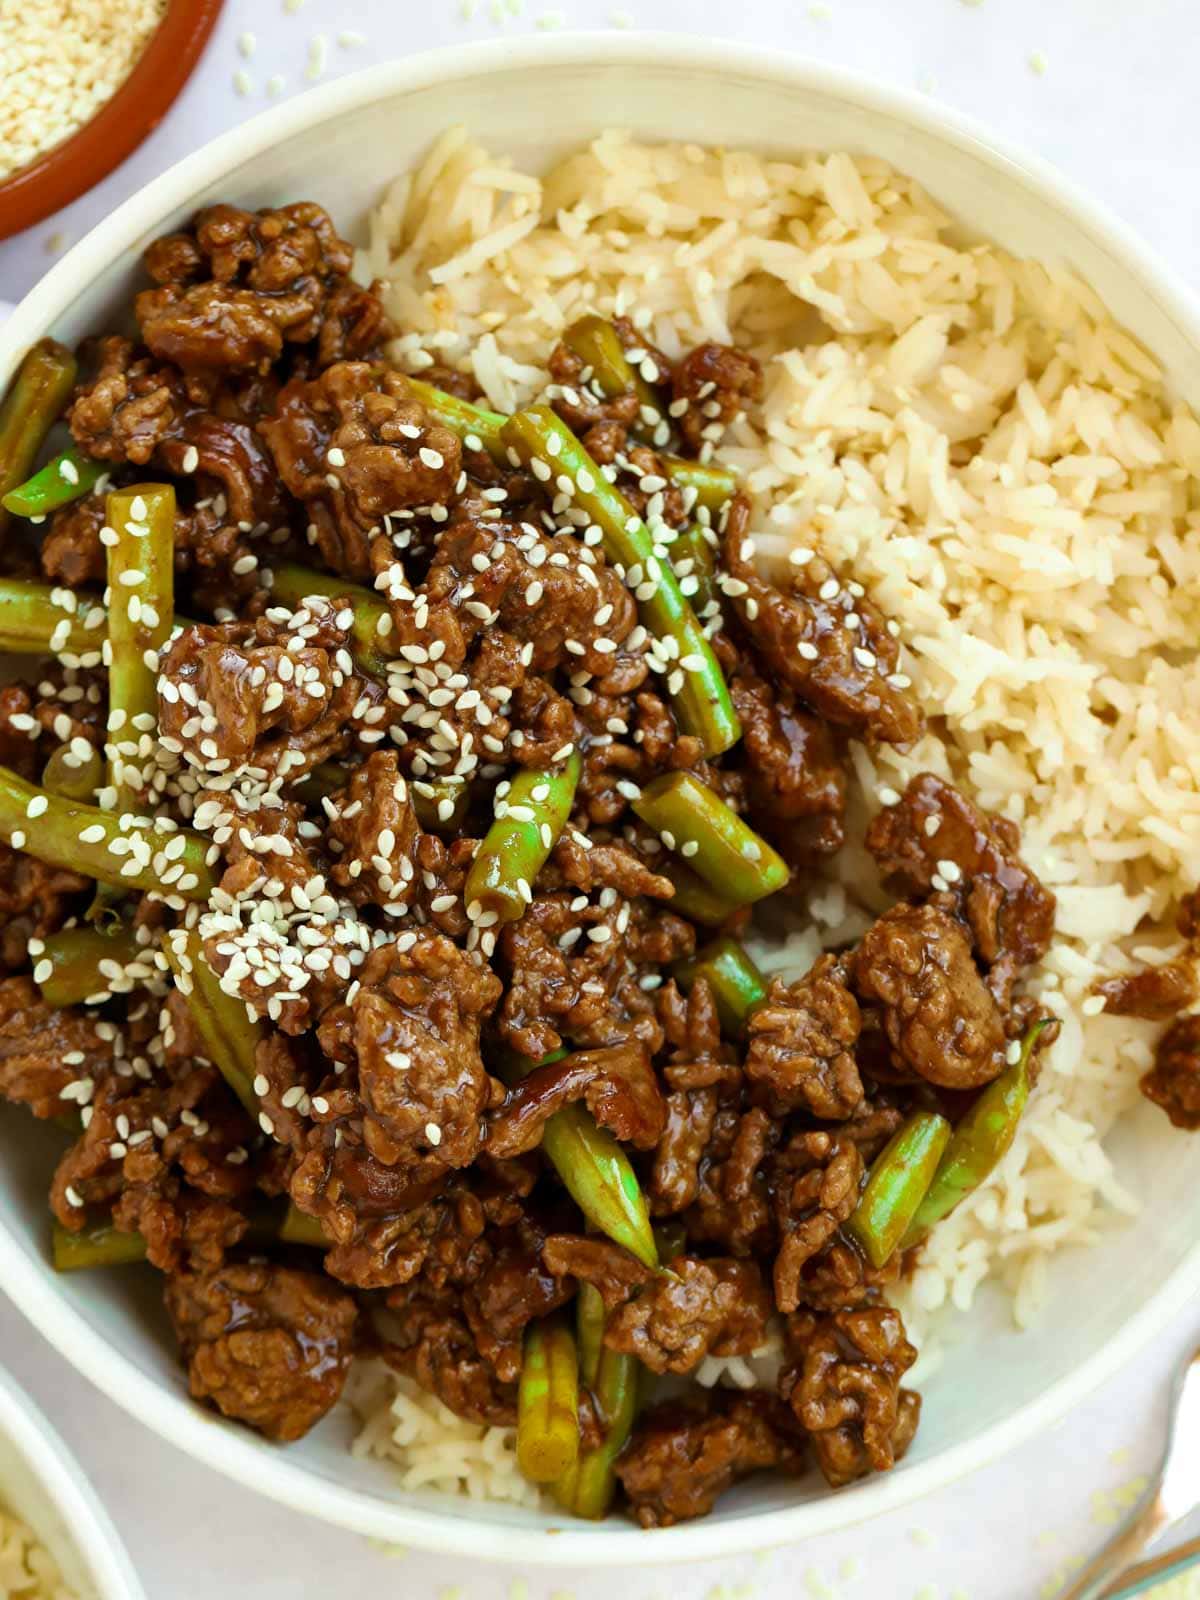 A simple beef mince recipe for a stir fry, served here with rice.